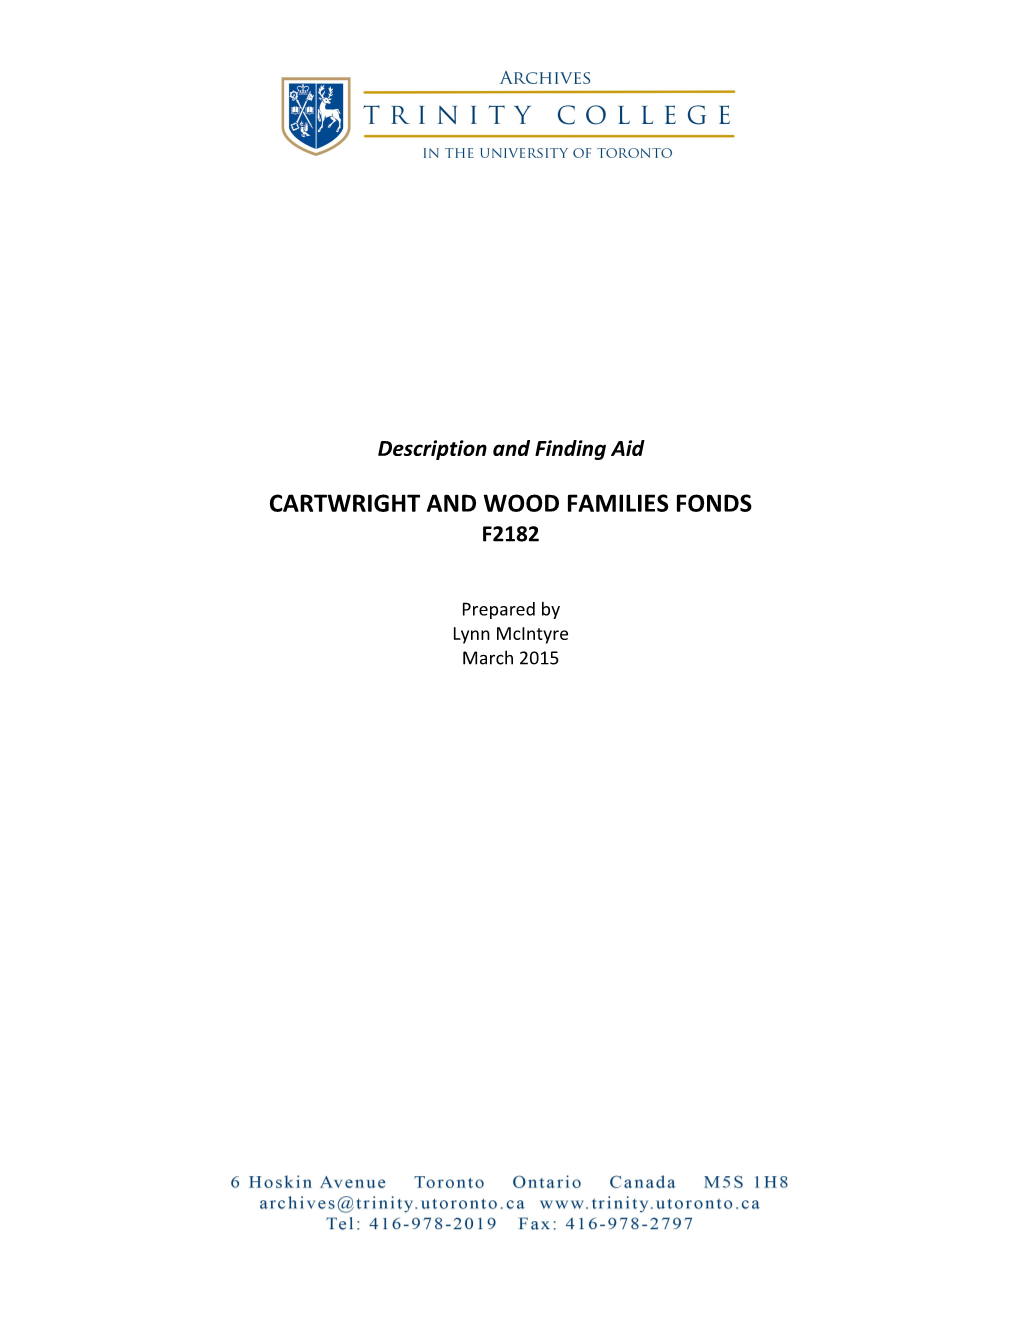 Cartwright and Wood Families Fonds F2182